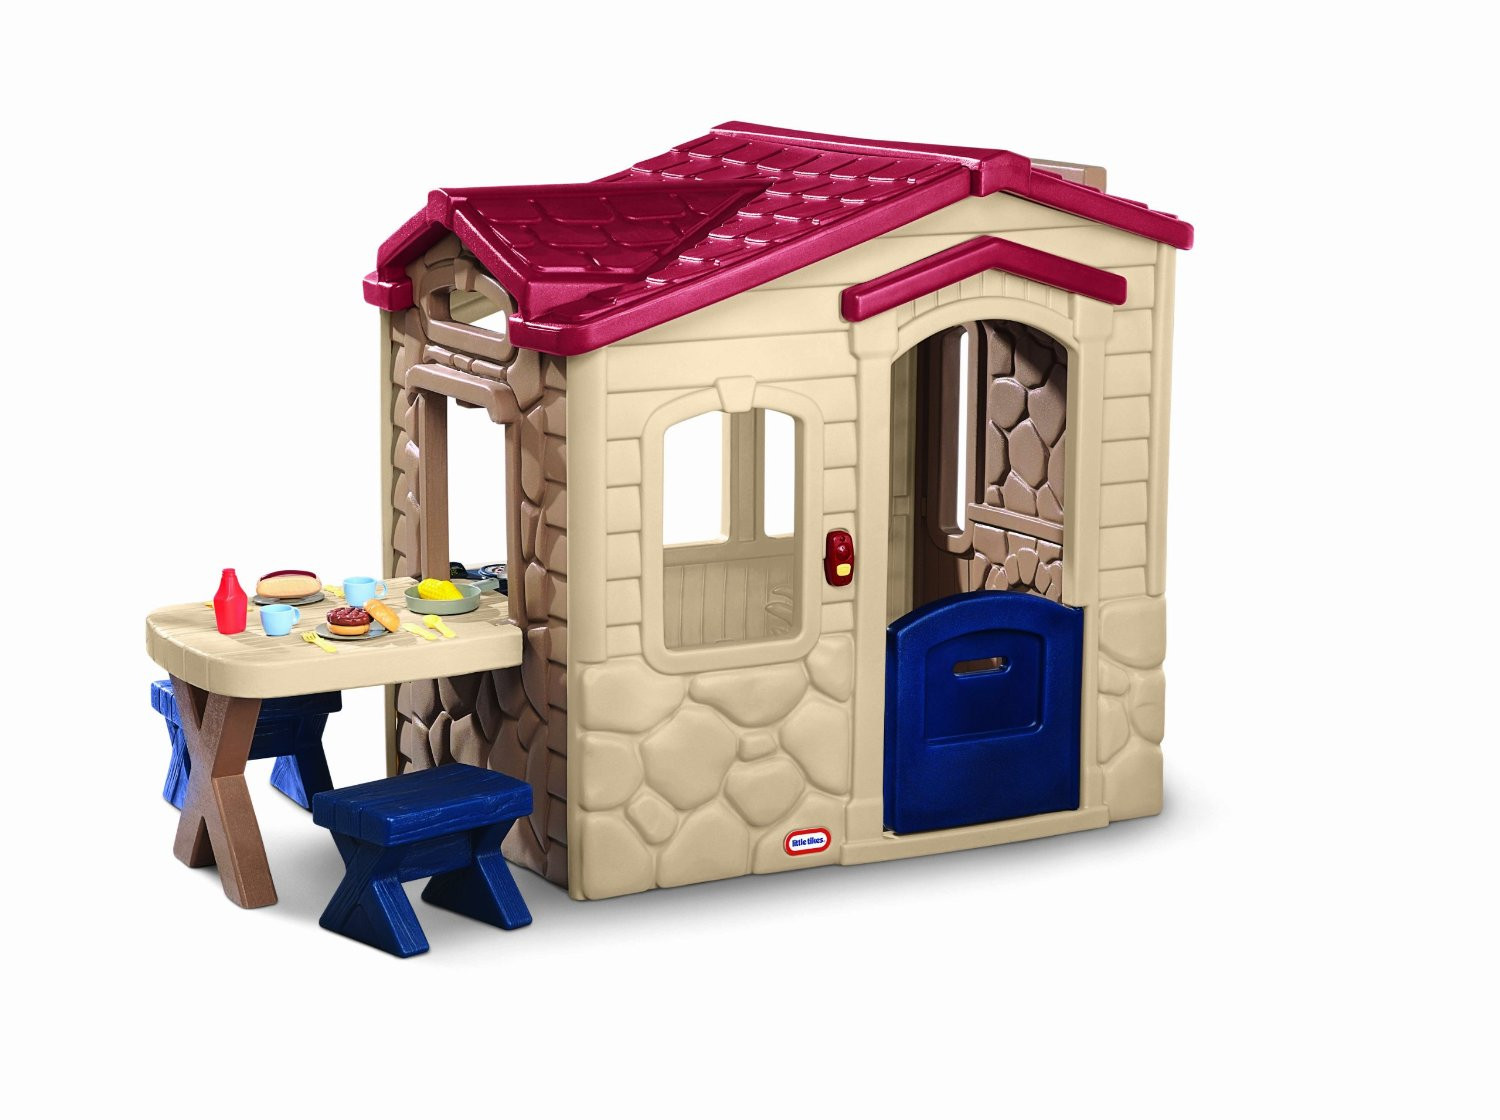 Best ideas about Little Tikes Picnic On The Patio Playhouse
. Save or Pin Little Tikes Picnic The Patio Playhouse Best Now.